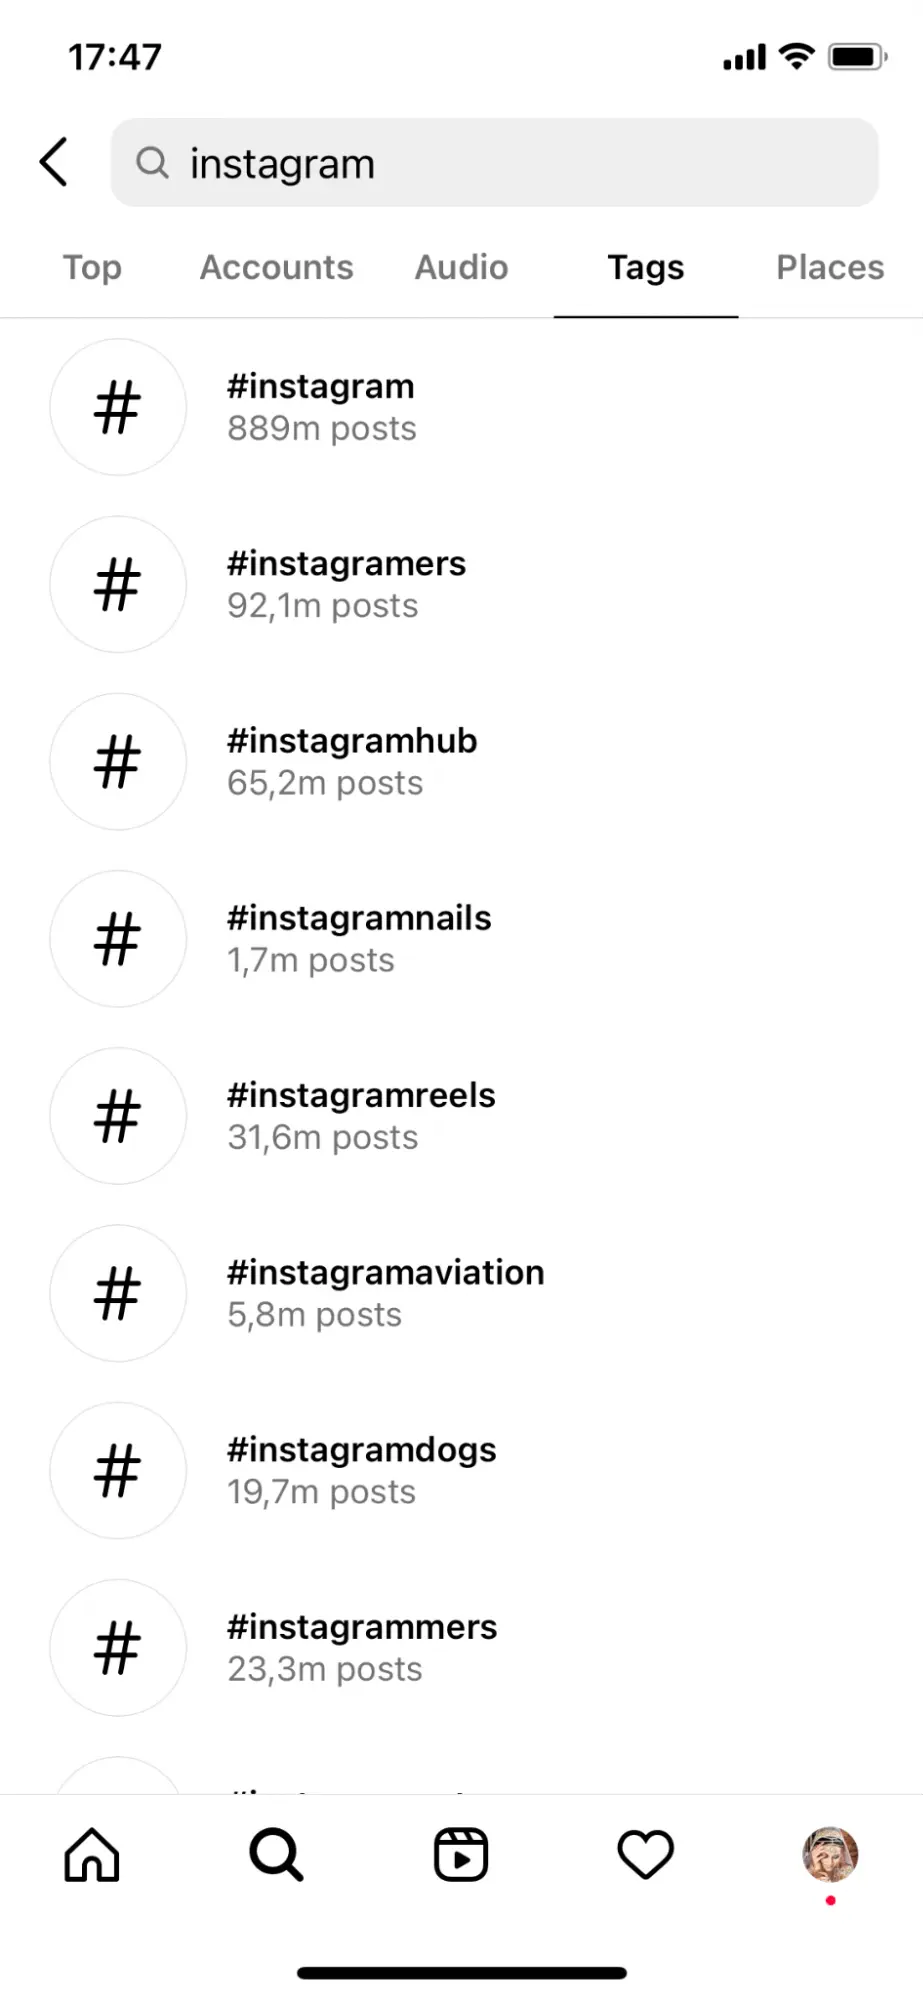 Screenshot shows searching for a hashtag